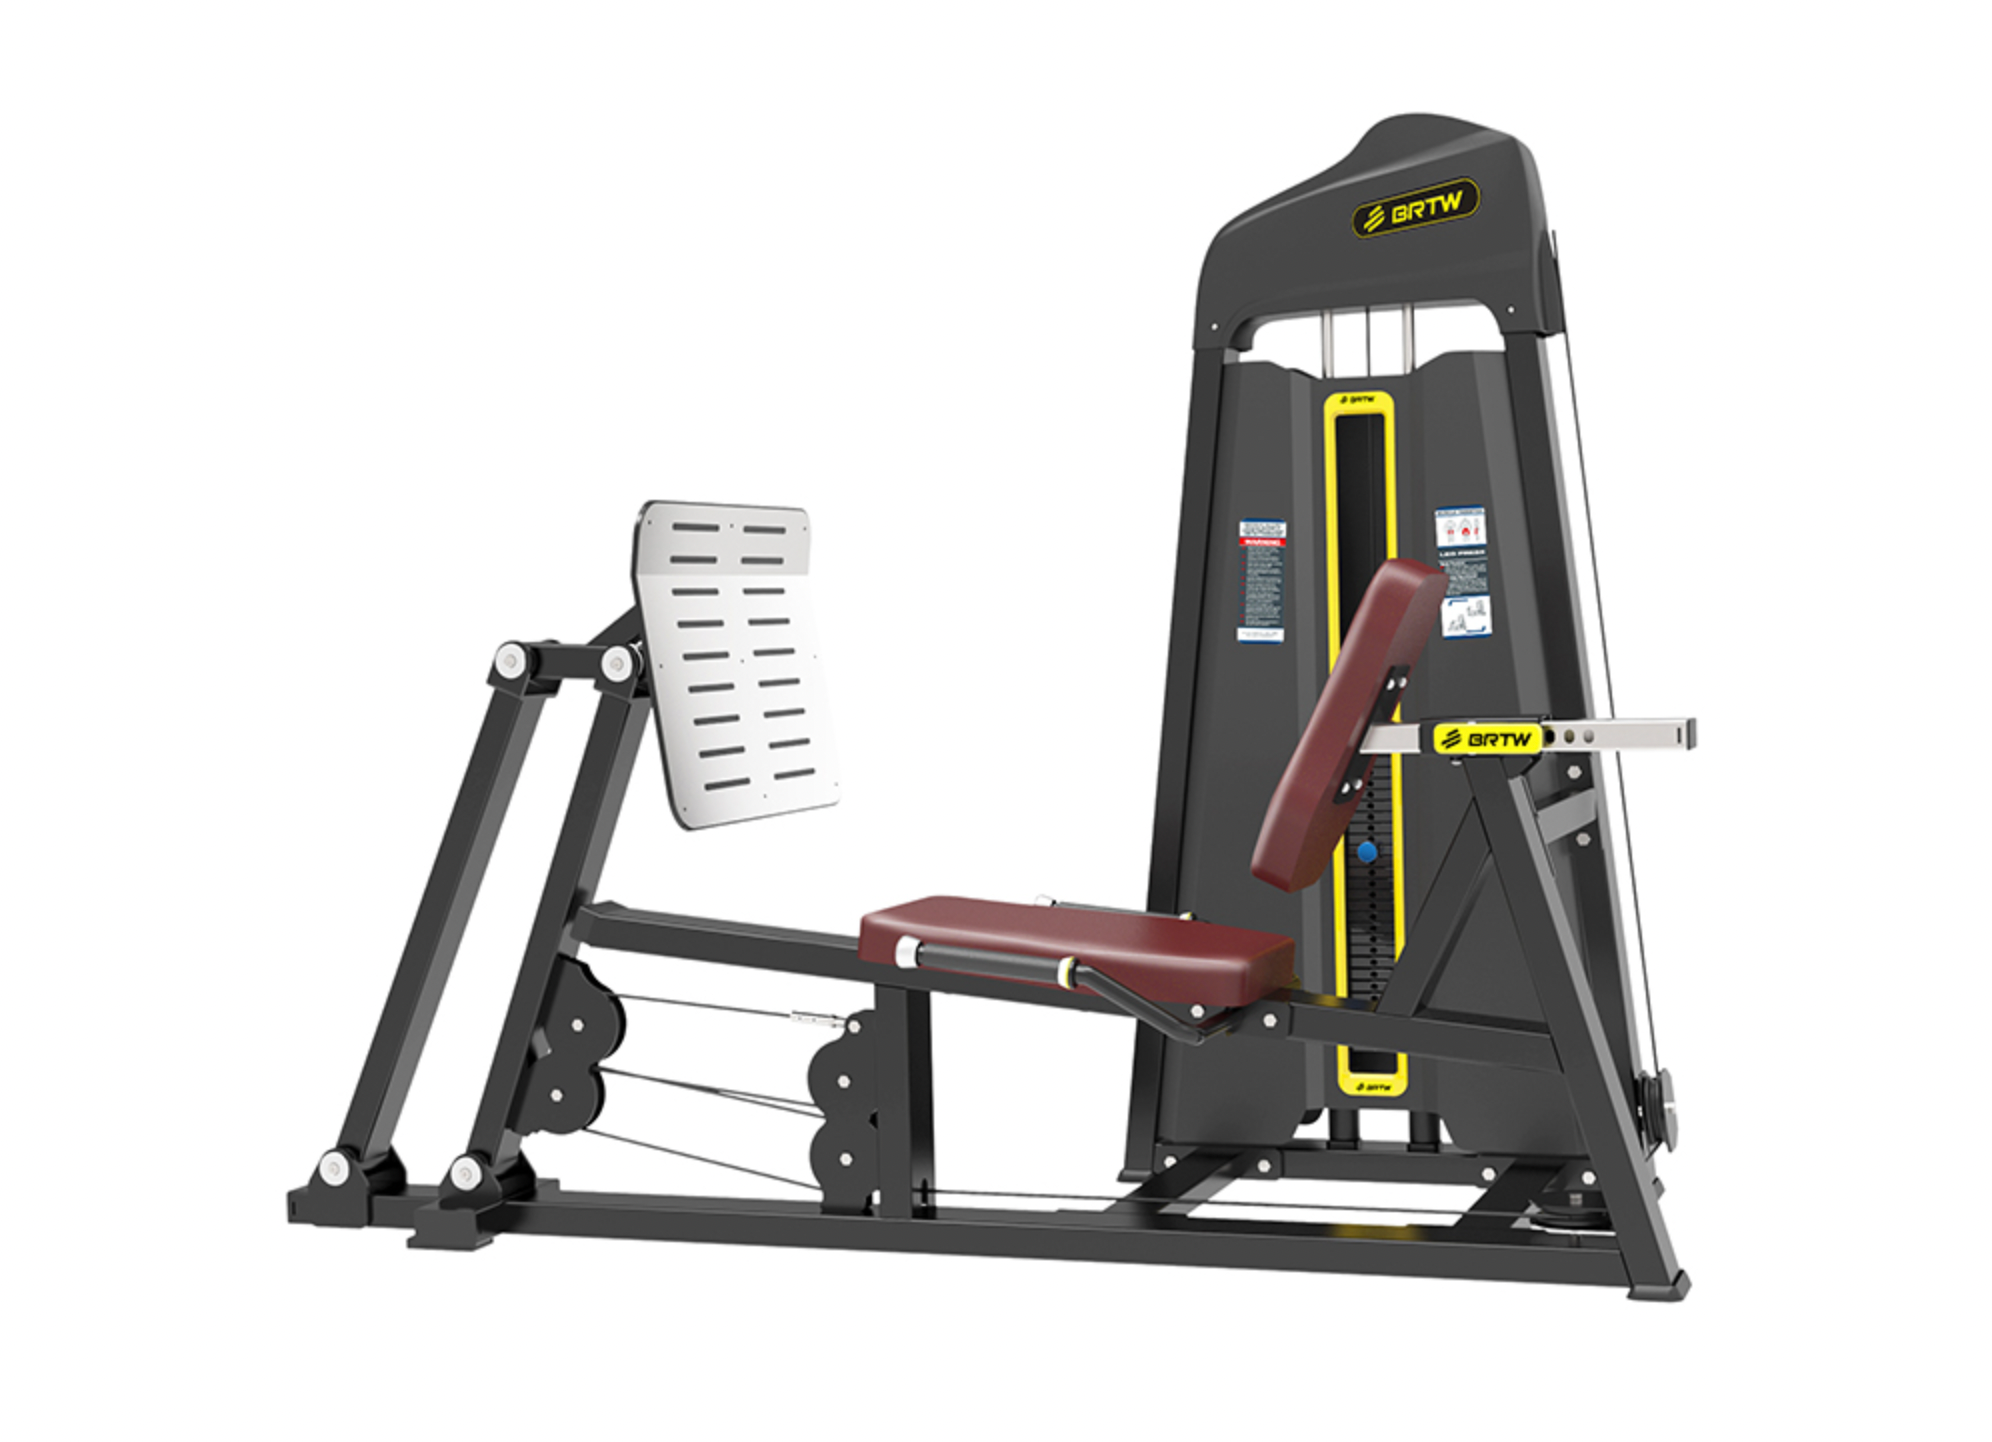 Leg Press | Pin Loaded | Made To Order [RELOAD - TB-X Series] - Fitness Hero Brand new